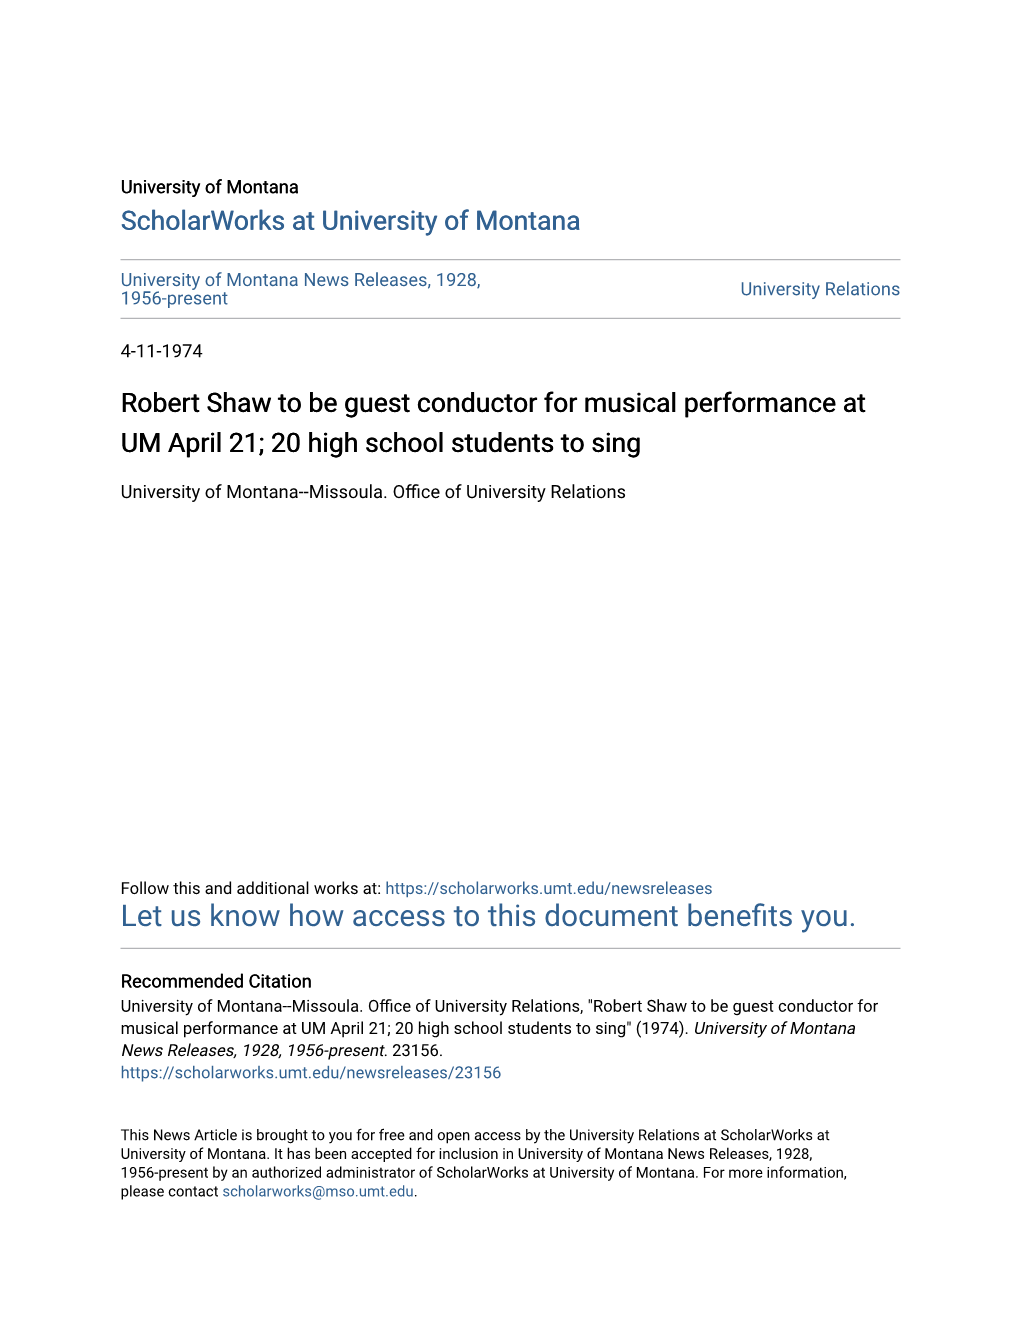 Robert Shaw to Be Guest Conductor for Musical Performance at UM April 21; 20 High School Students to Sing